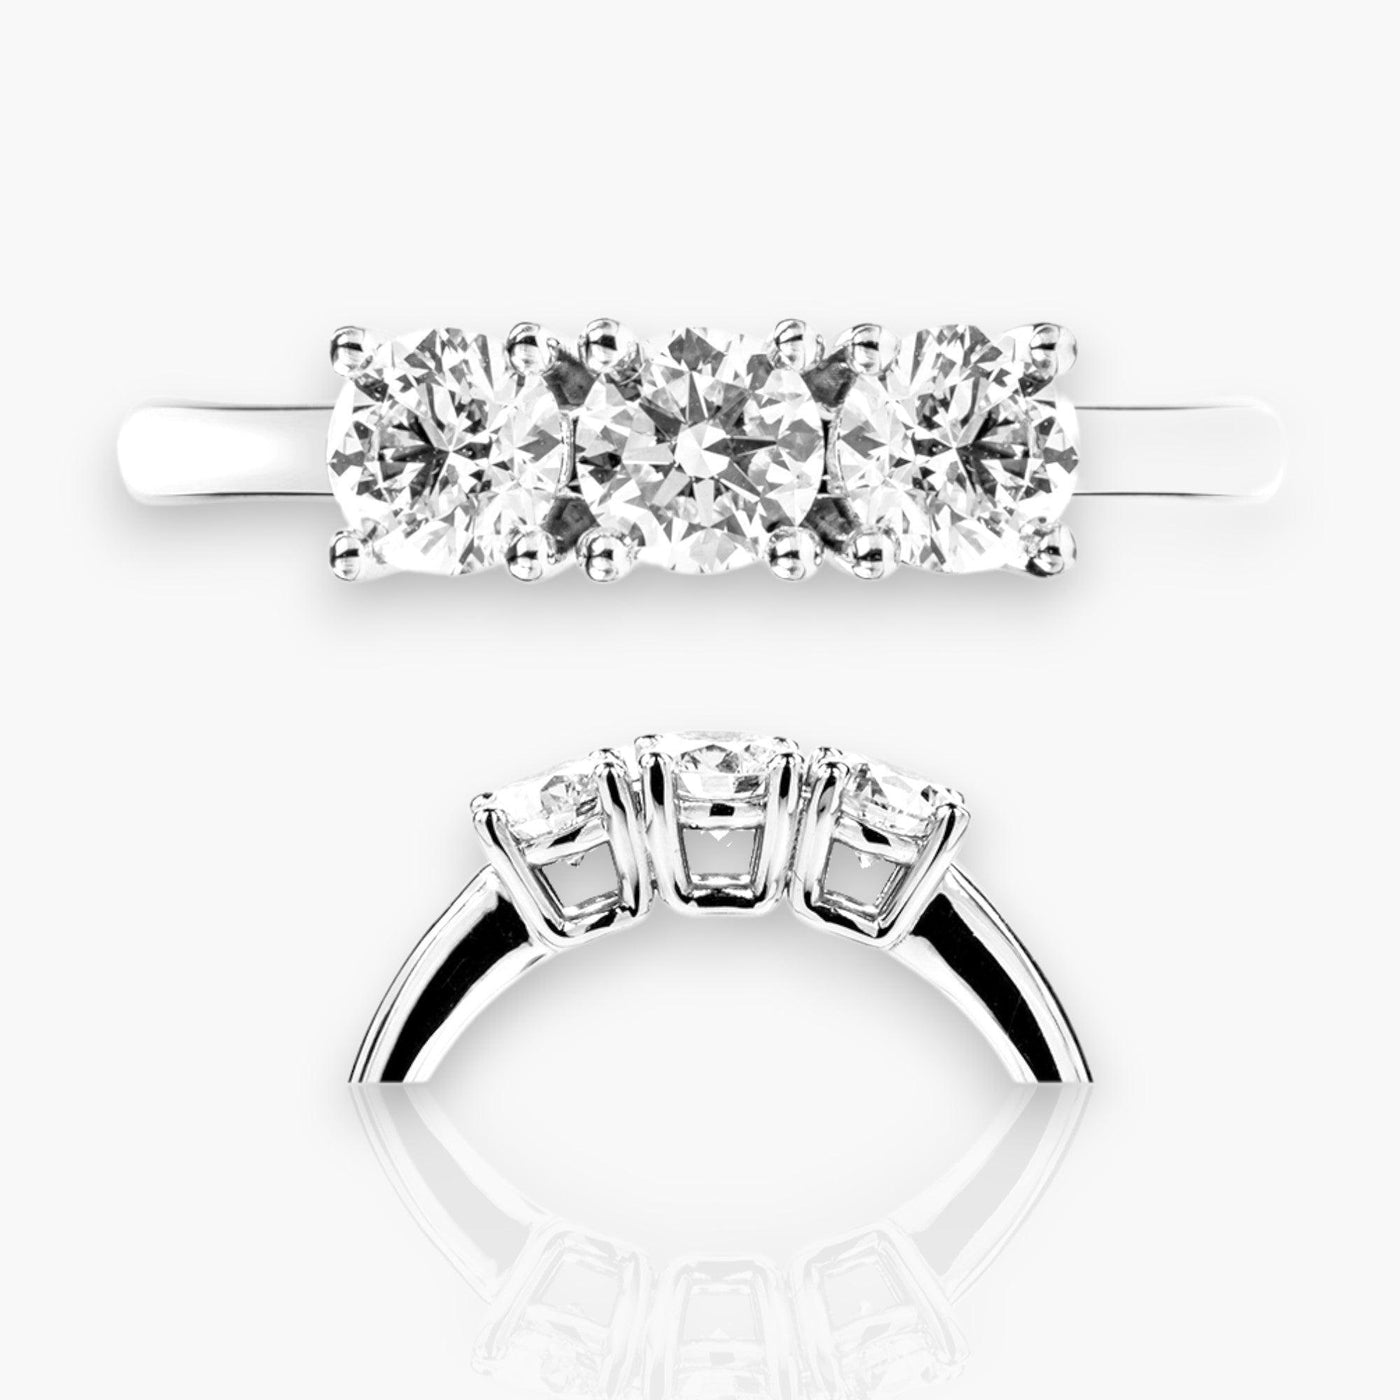 TRILOGY 2 - Riviera Engagement Ring - Moregola Fine Jewelry